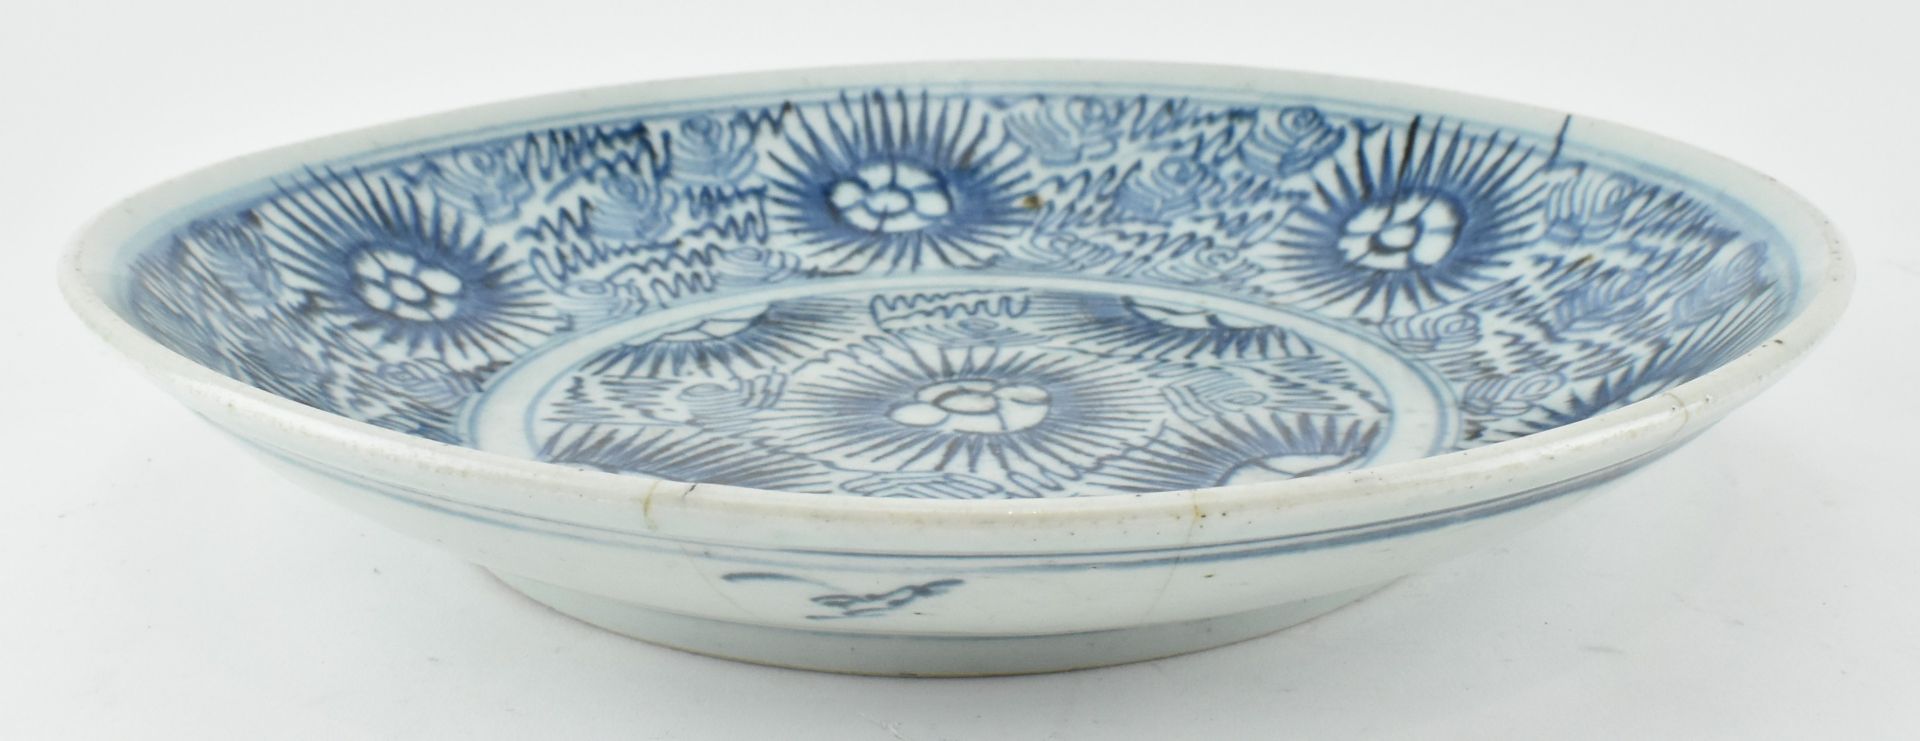 LATE 19TH CENTURY BLUE AND WHITE STARBURST CHARGER - Image 3 of 5